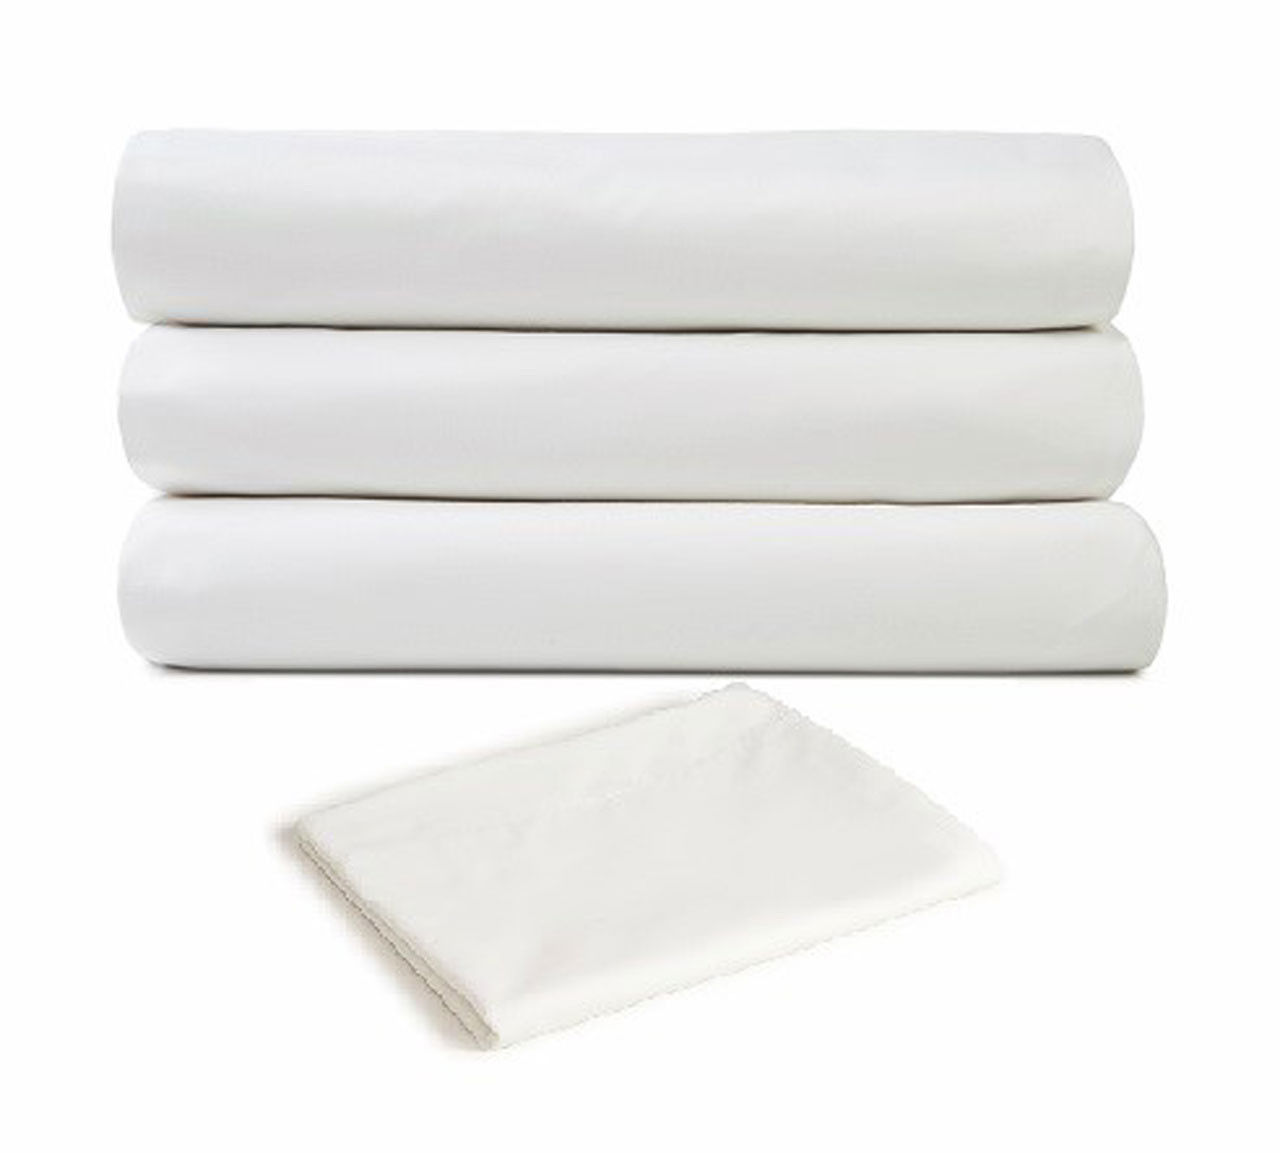 What's the texture of these cotton poly sheets like?